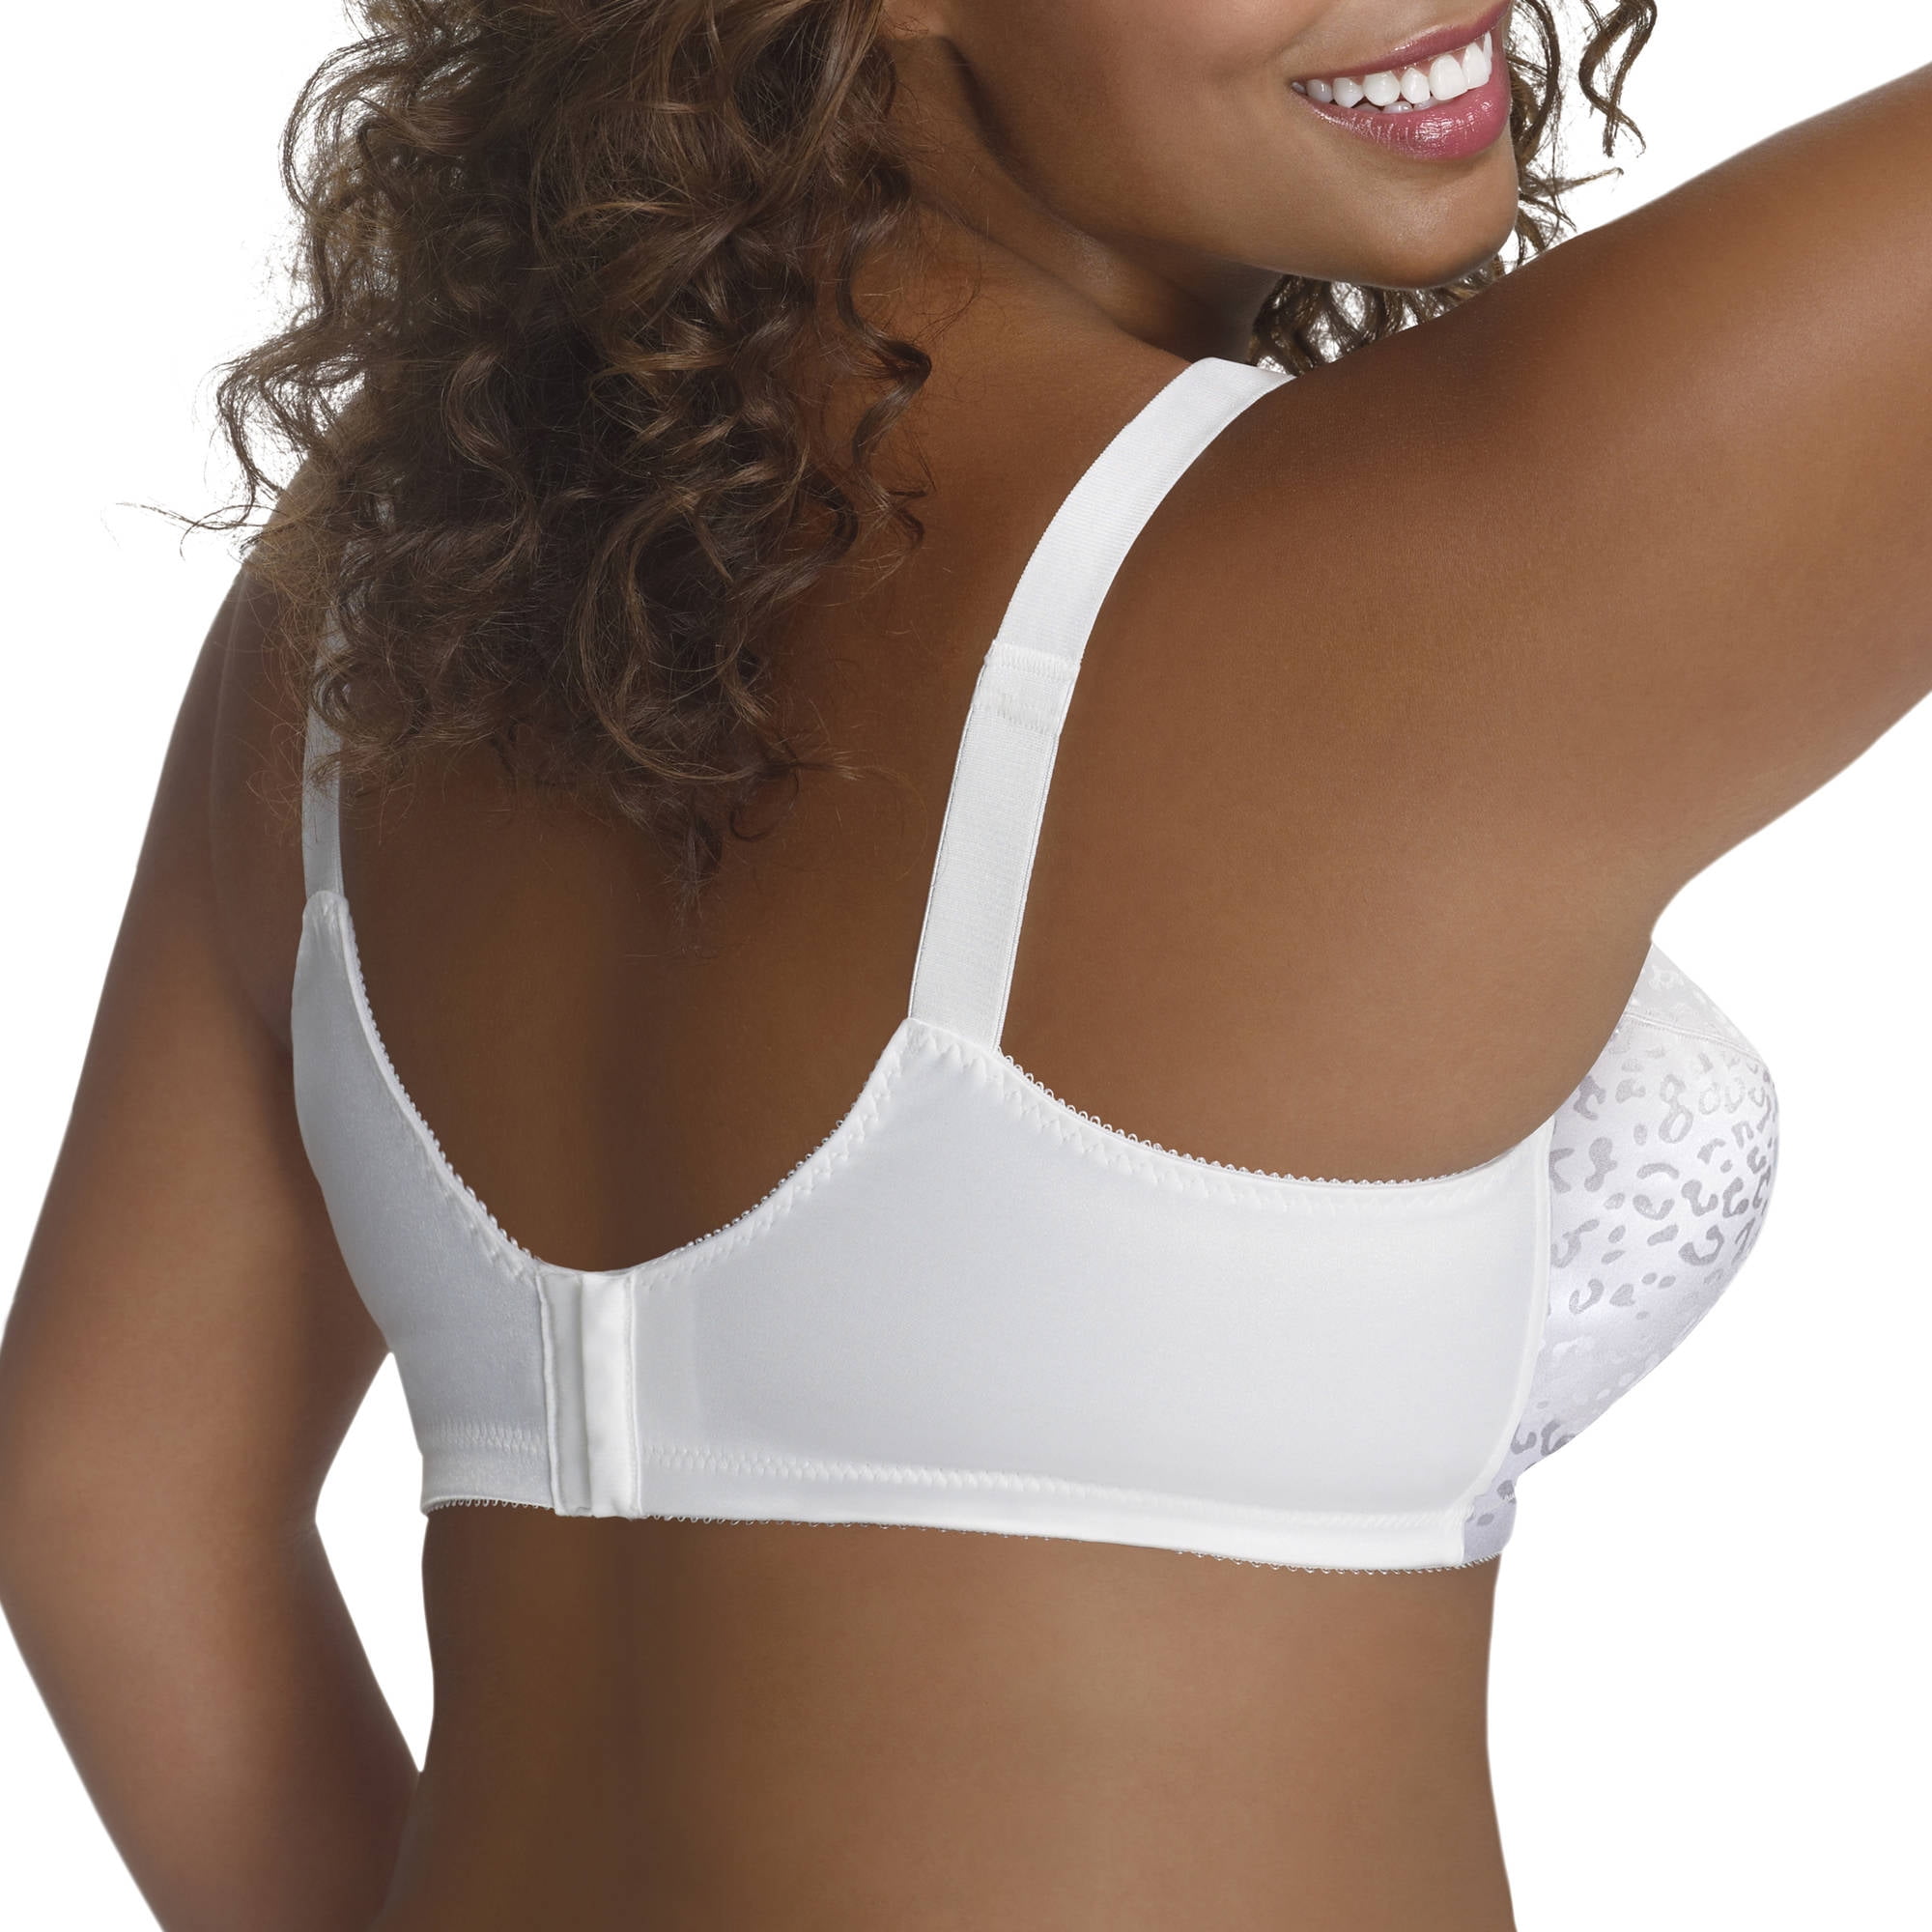 Just My Size® Bras: 2-pack Satin Stretch Full-Figure Wire-Free Bra